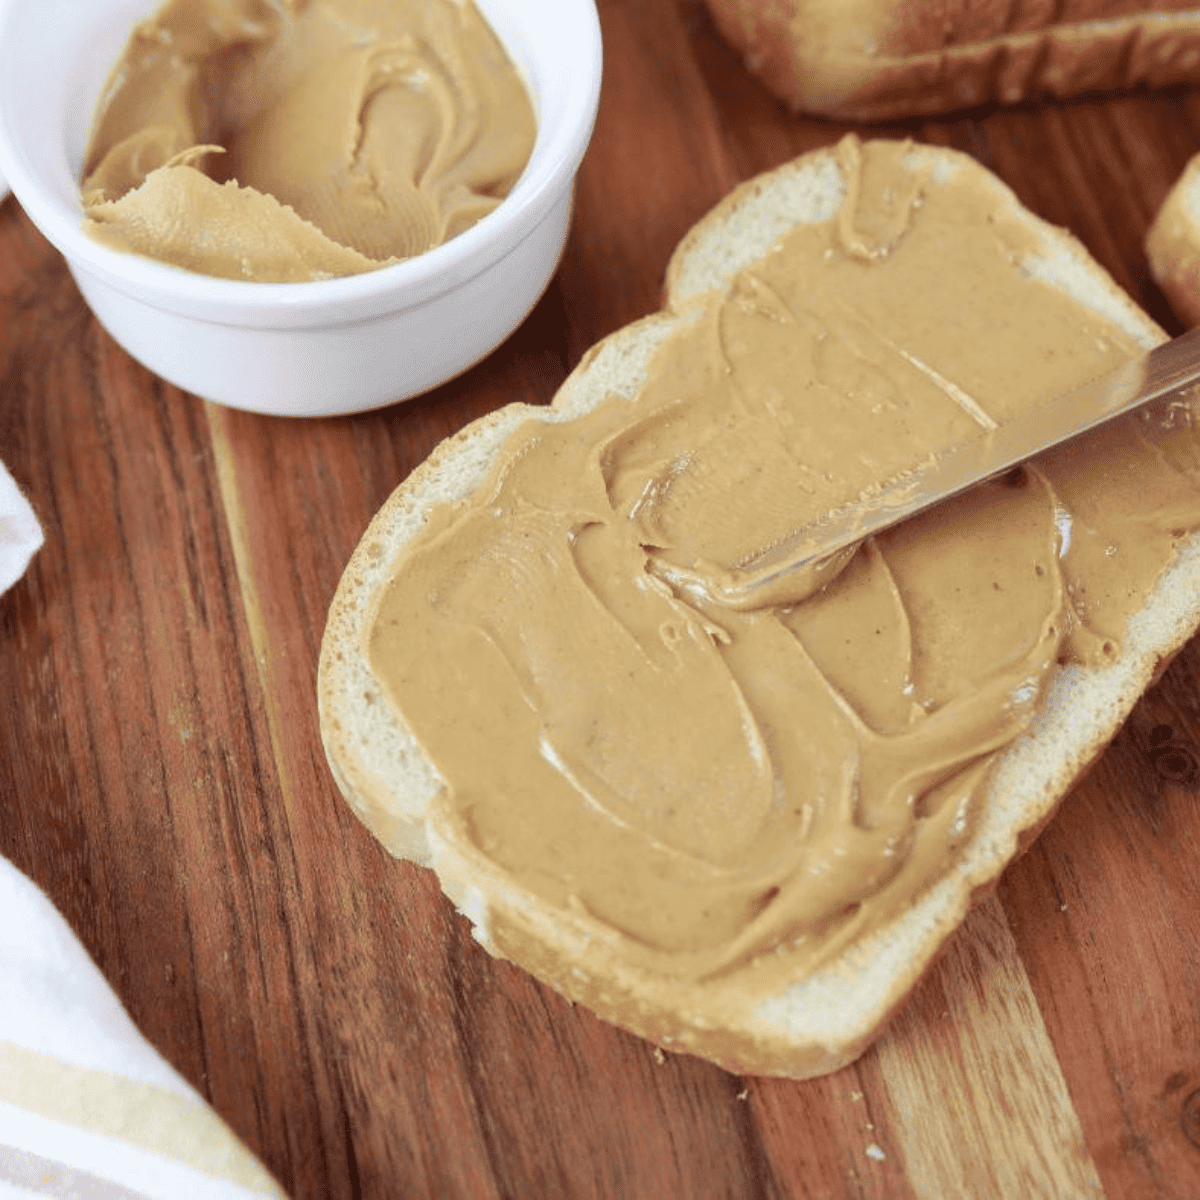 Indulge in a delightful treat with this quick and easy recipe for an Air Fryer Peanut Butter Banana Sandwich. In just a matter of minutes, you can enjoy a warm and crispy sandwich filled with creamy peanut butter, sweet ripe bananas, and optional drizzles of honey and cinnamon.